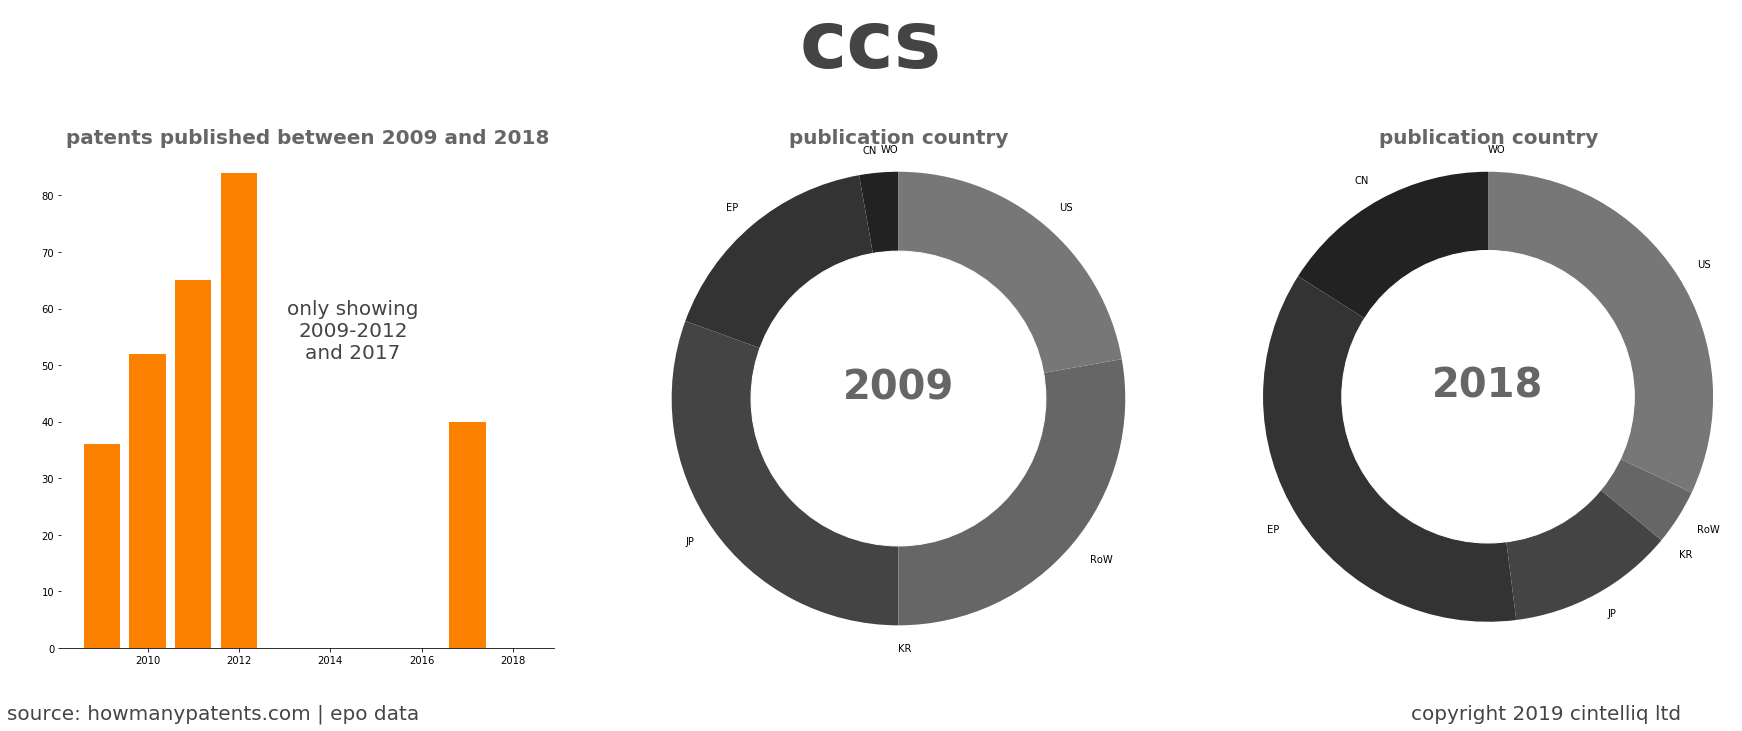 summary of patents for Ccs